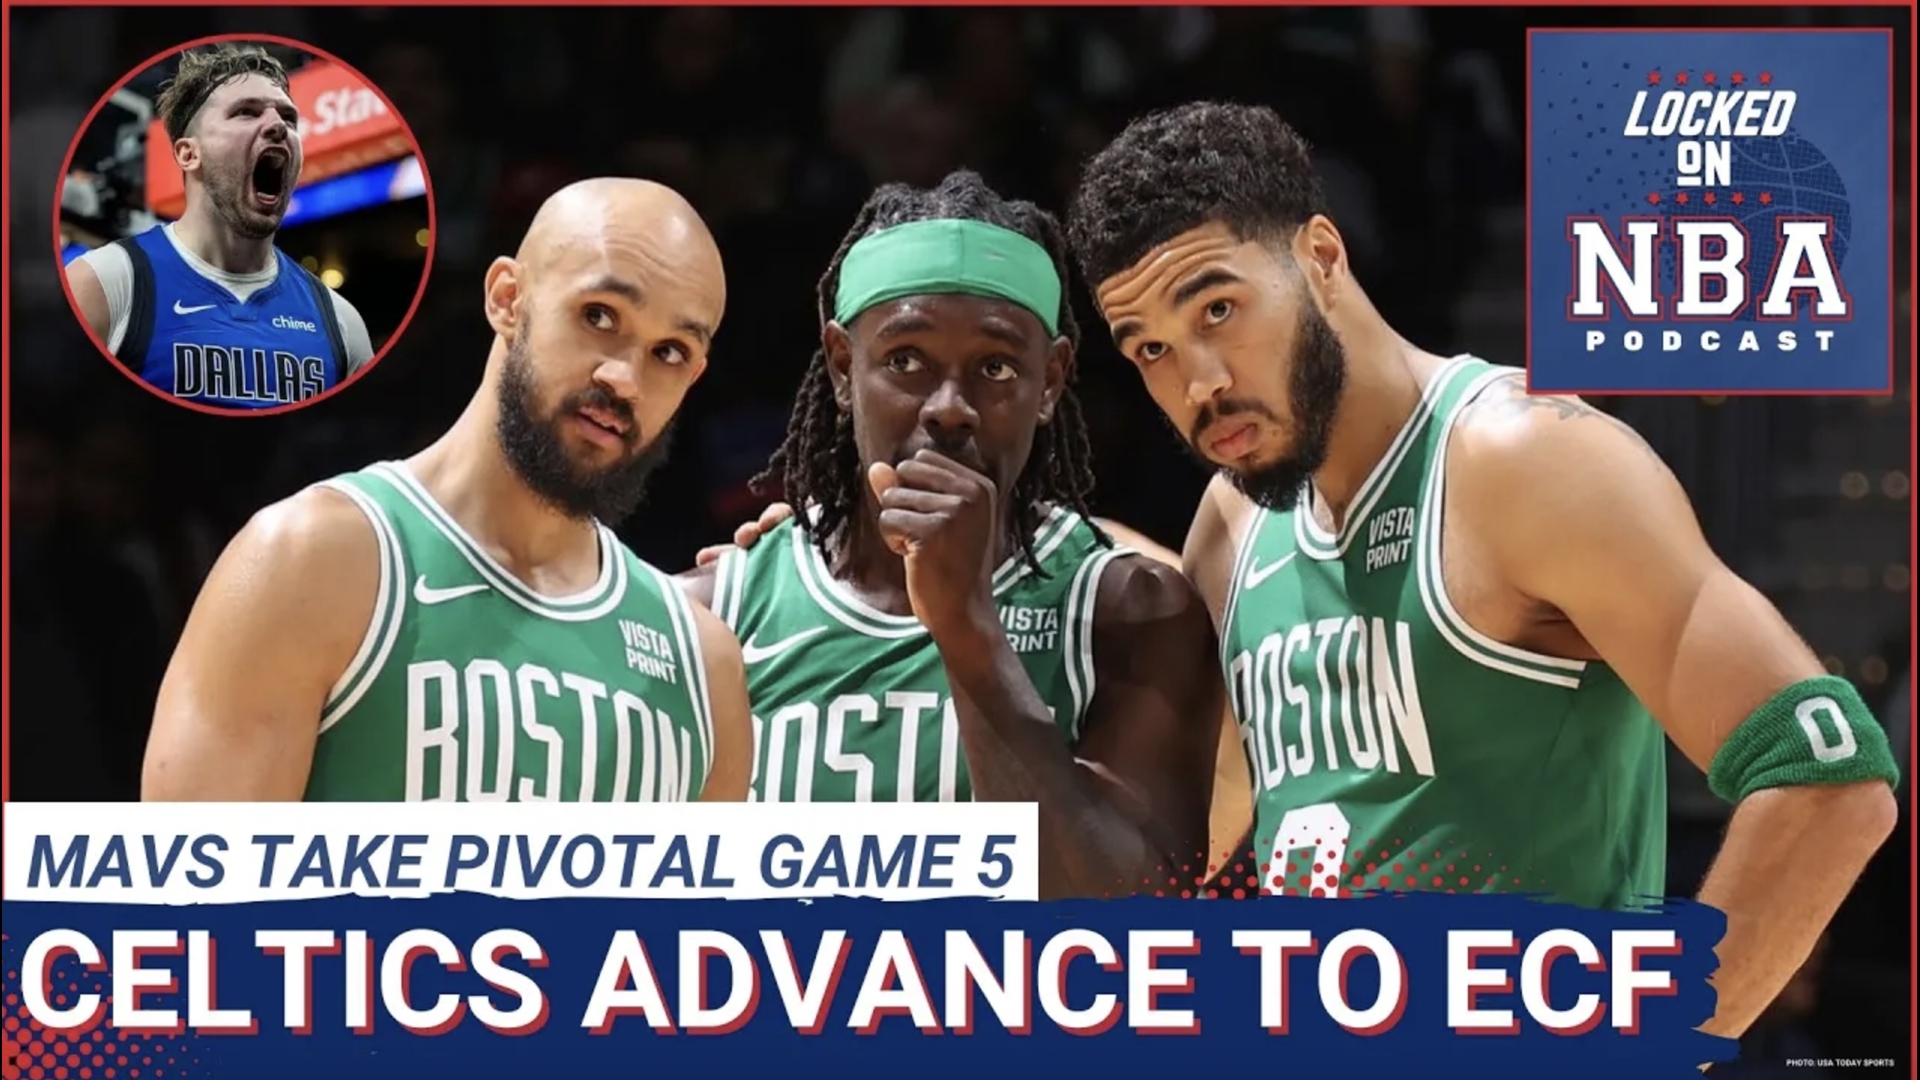 On today's episode of locked on NBA, path the designer and swipacam talk about the Boston Celtics and their chances of advancing to the NBA finals.